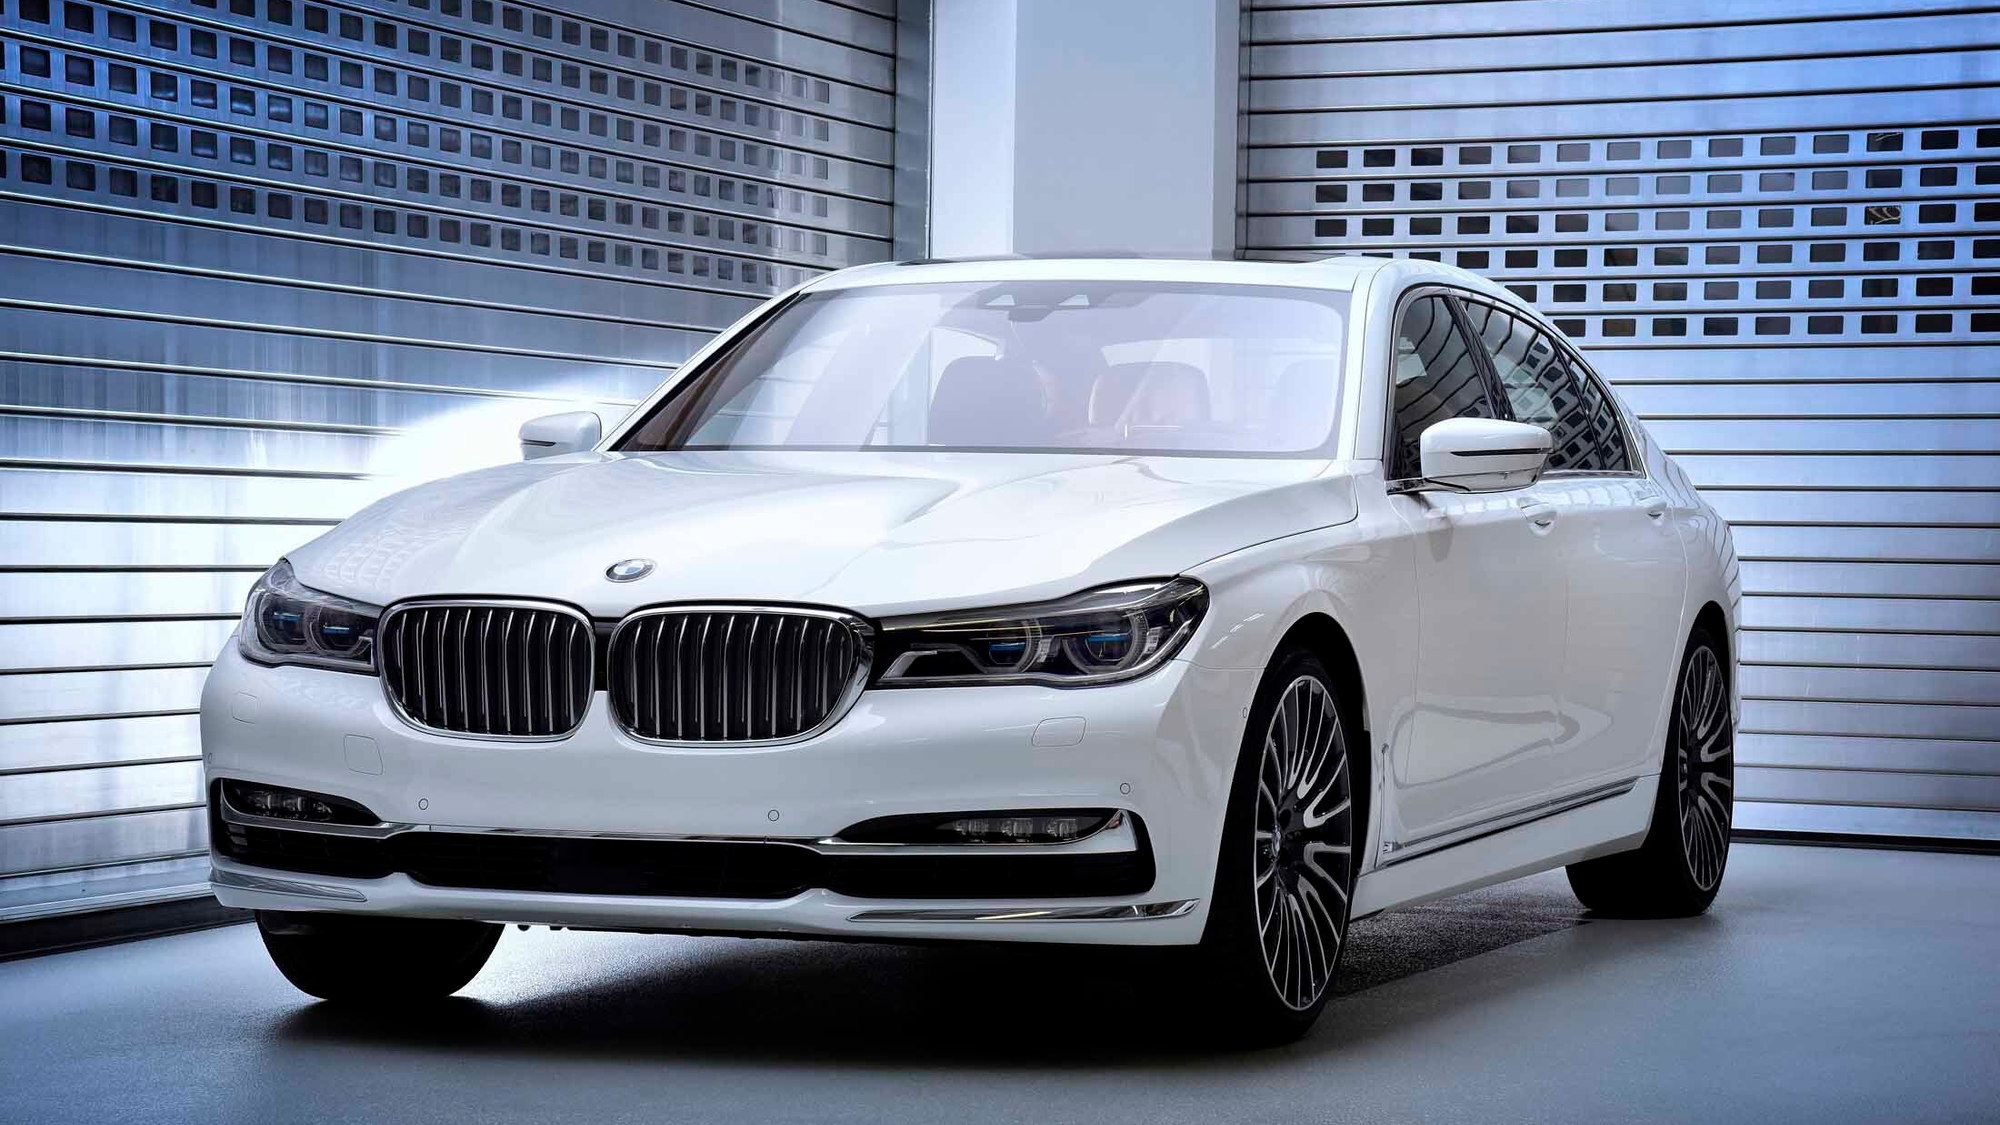 BMW 7-Series Master Class and Solitaire Editions